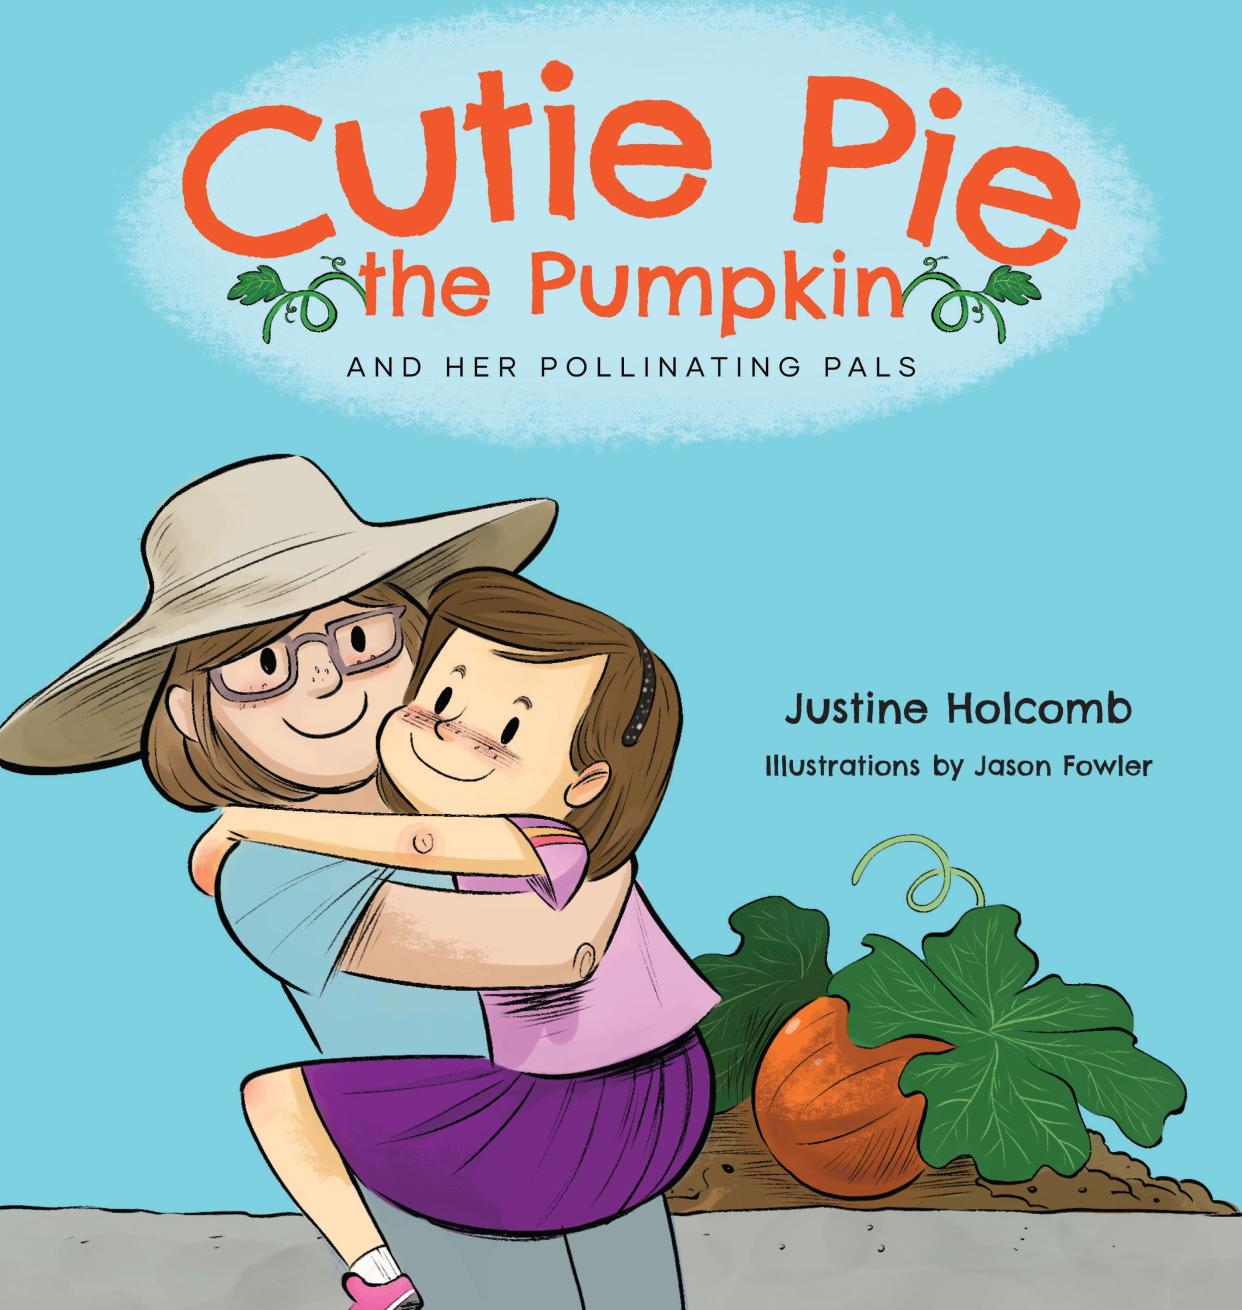 “Cutie Pie the Pumpkin and Her Pollinating Pals” is the debut children's book by Sarasota elementary school teacher Justine Holcomb.